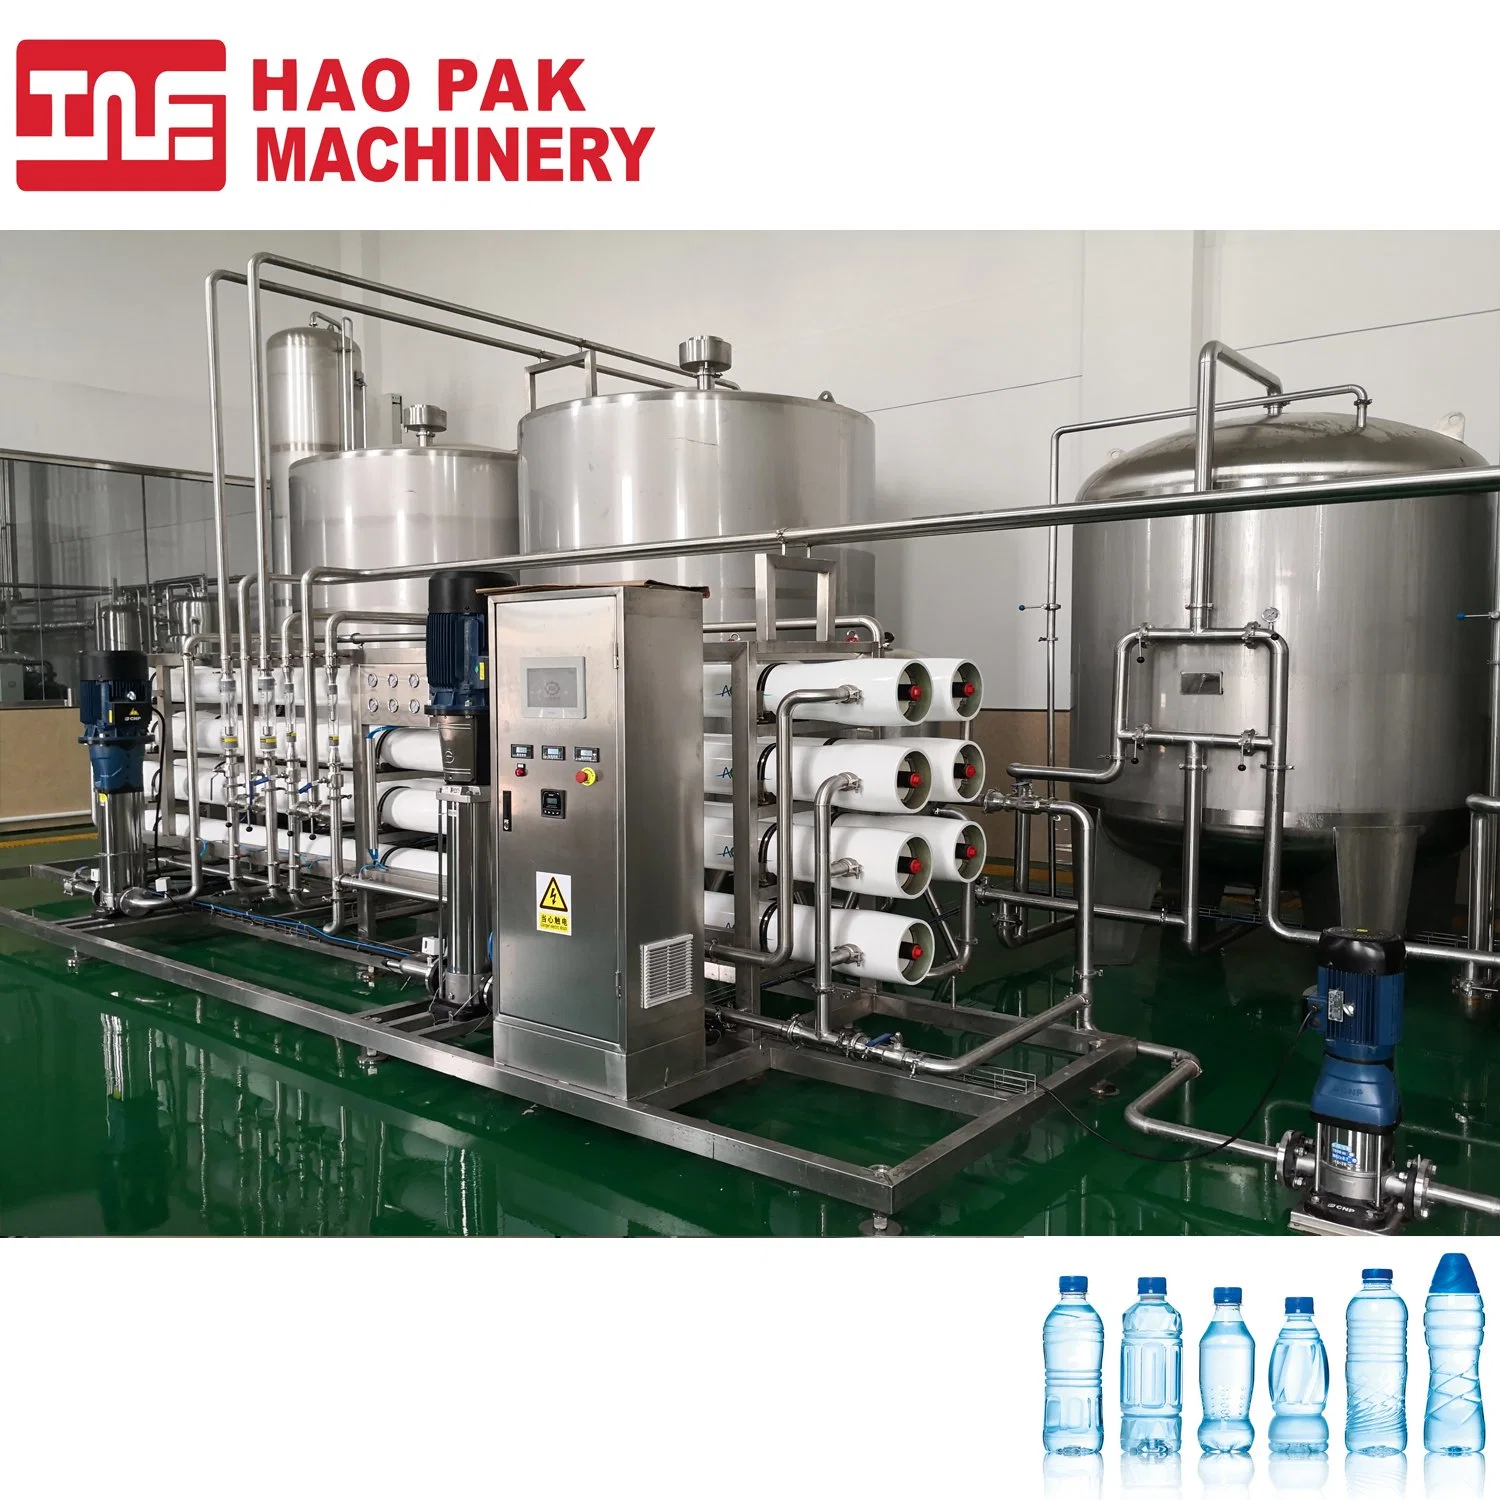 Automatic Complete RO Water Purifier System Filter Production Machine Equipment Drink Water Reverse Osmosis Treatment Plant